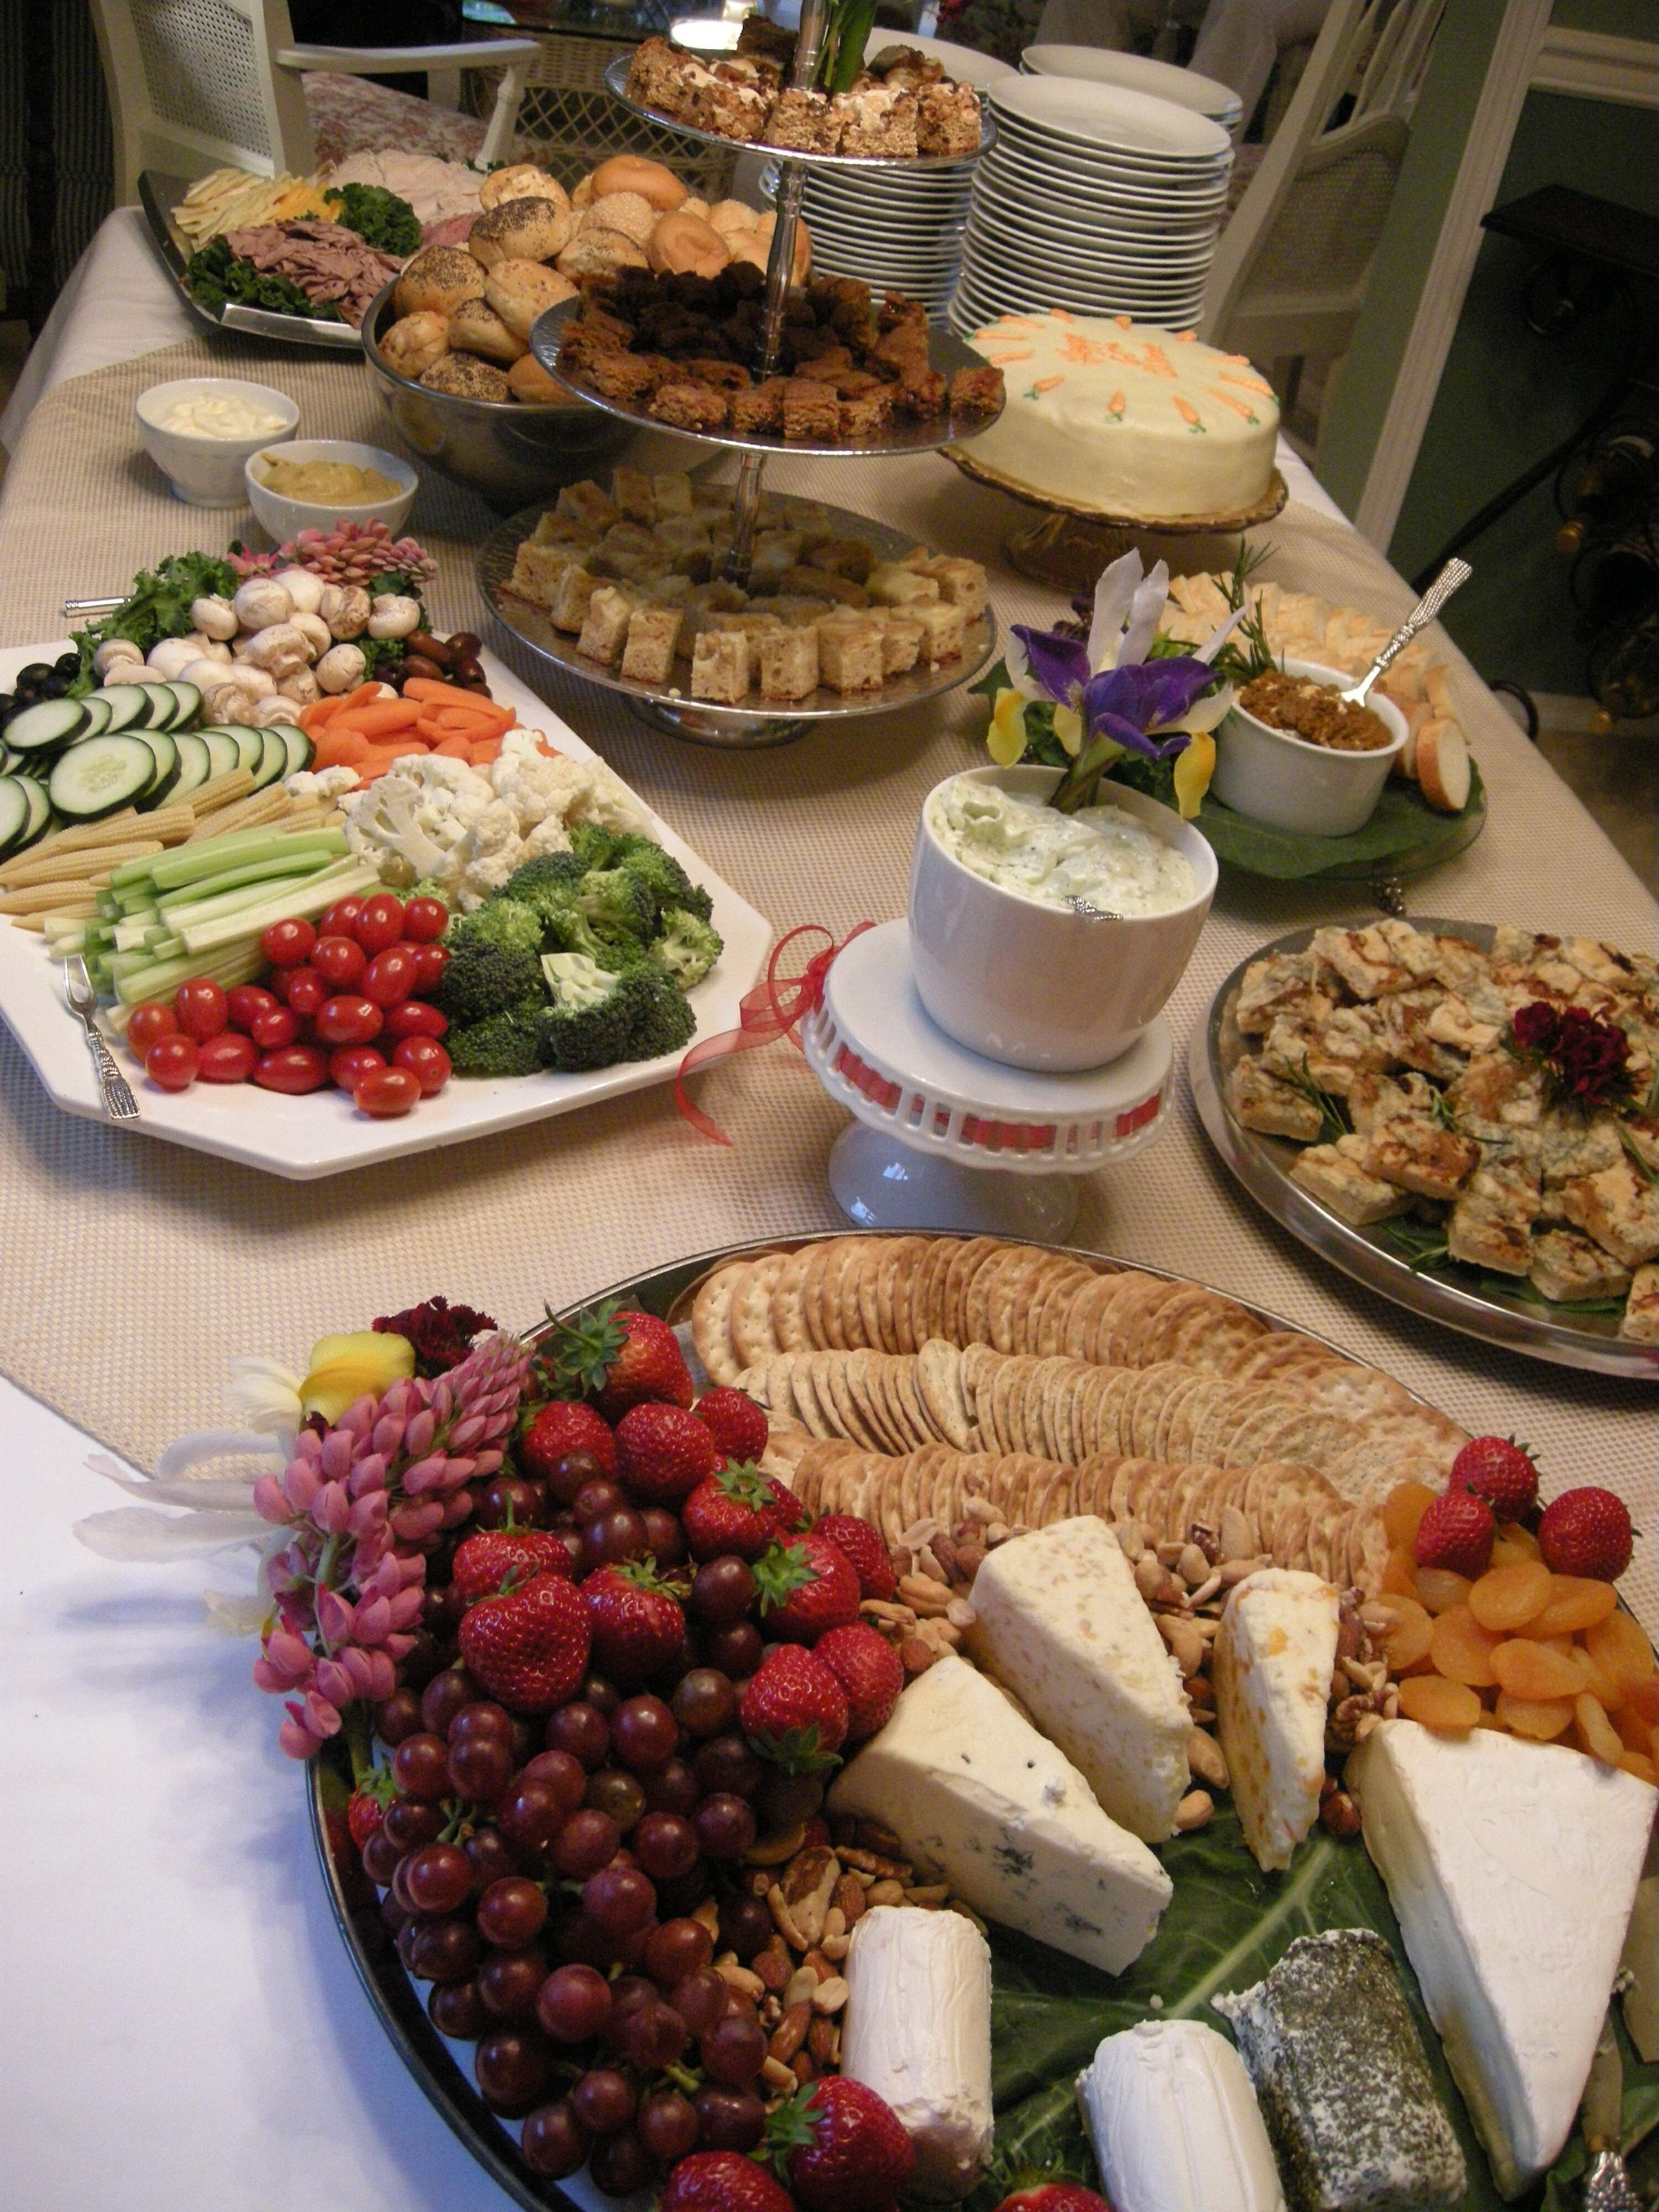 Christmas Party Food Ideas Buffet
 Open House In Home Buffet